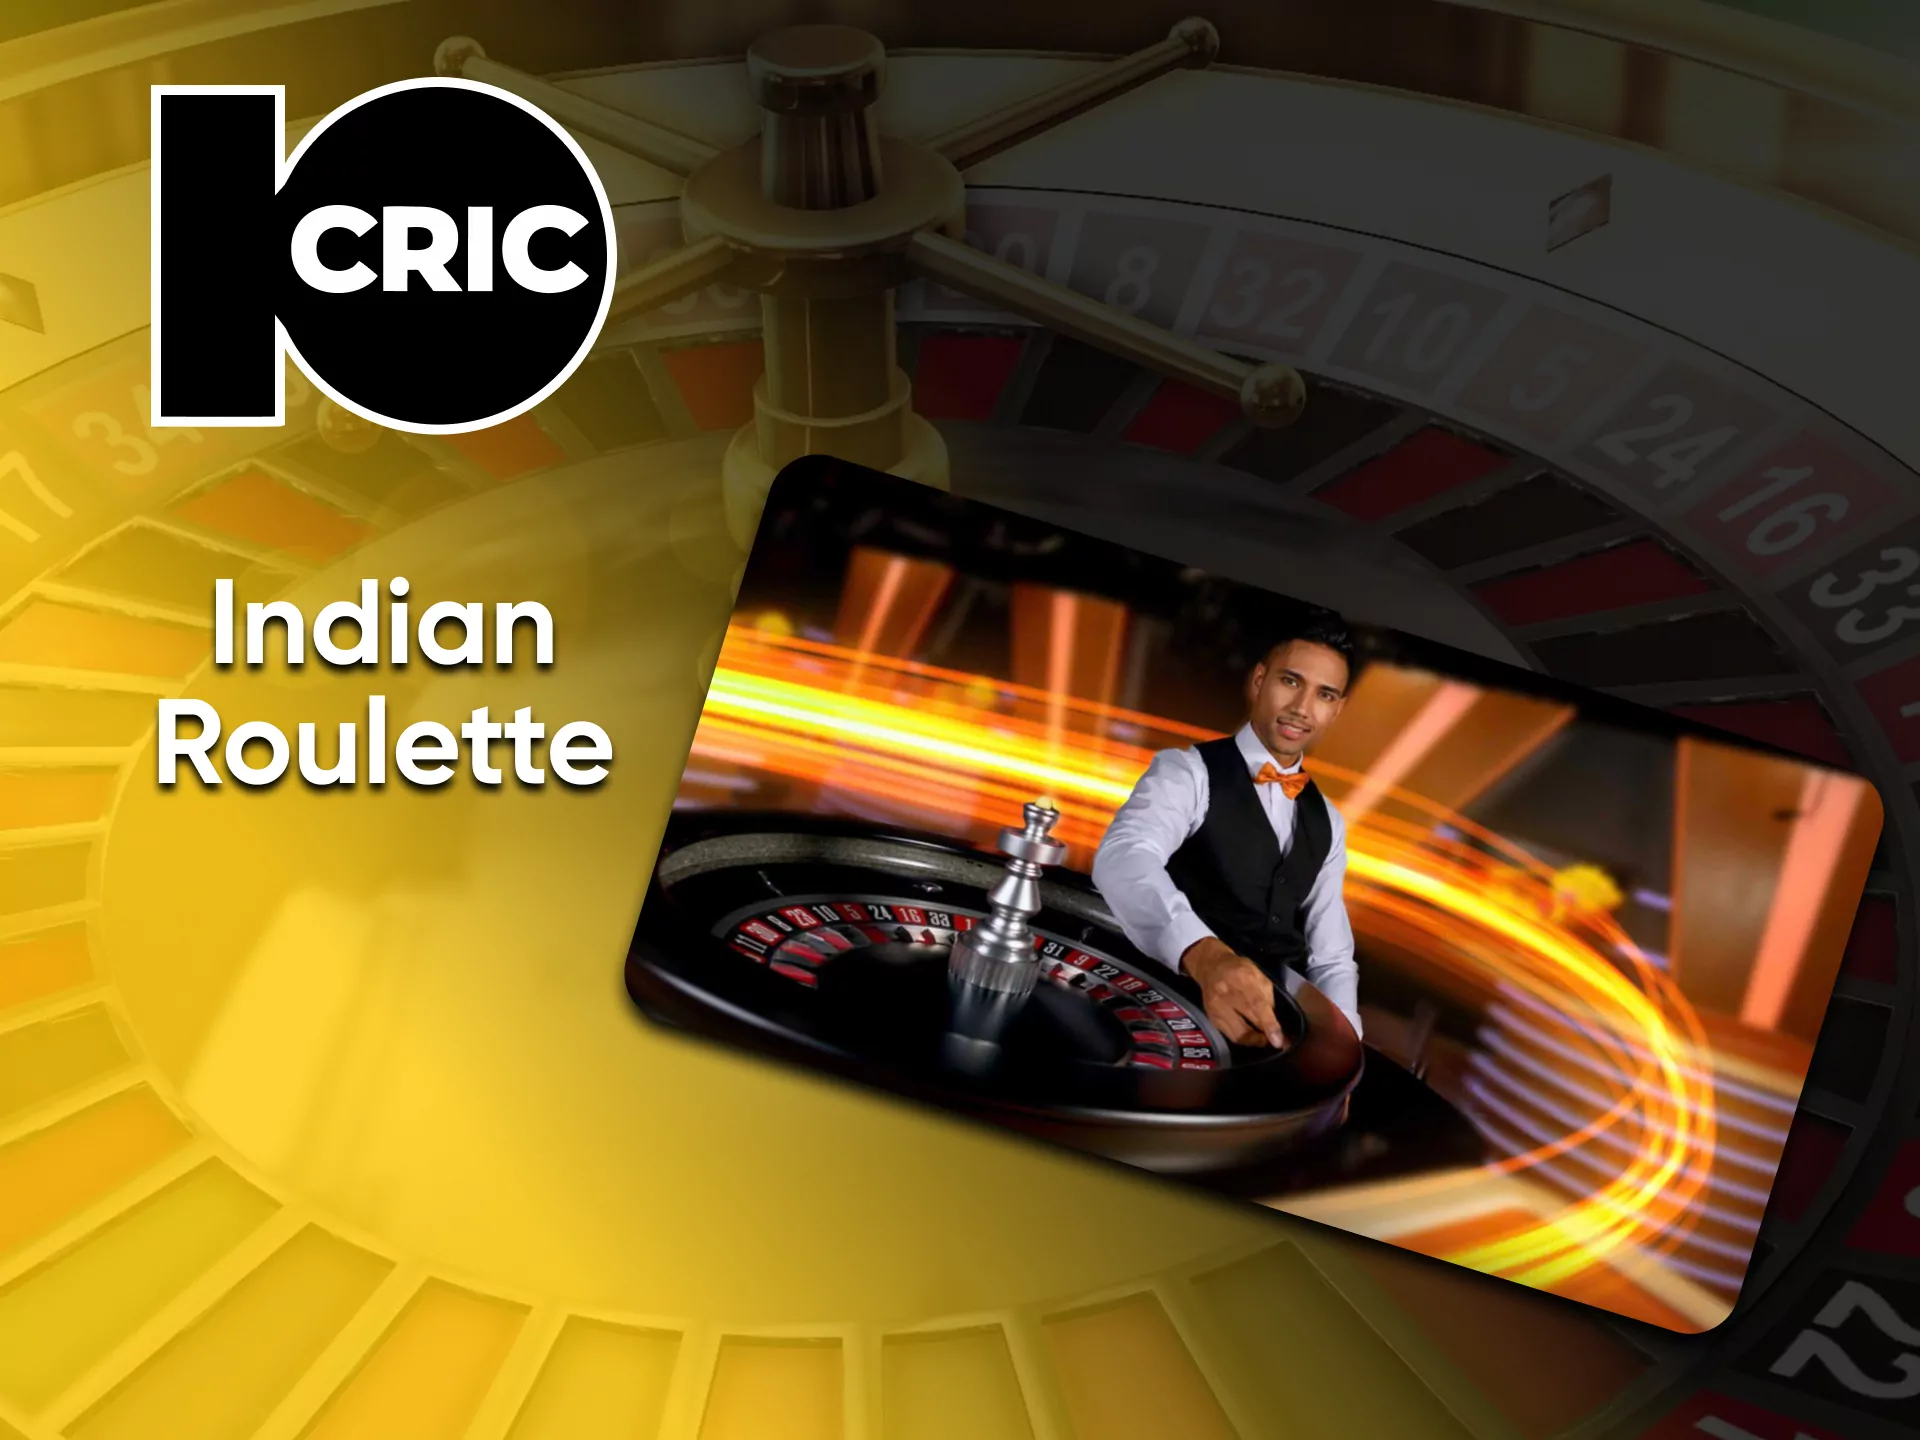 Go to the right section to play Indian Roulette from 10cric.